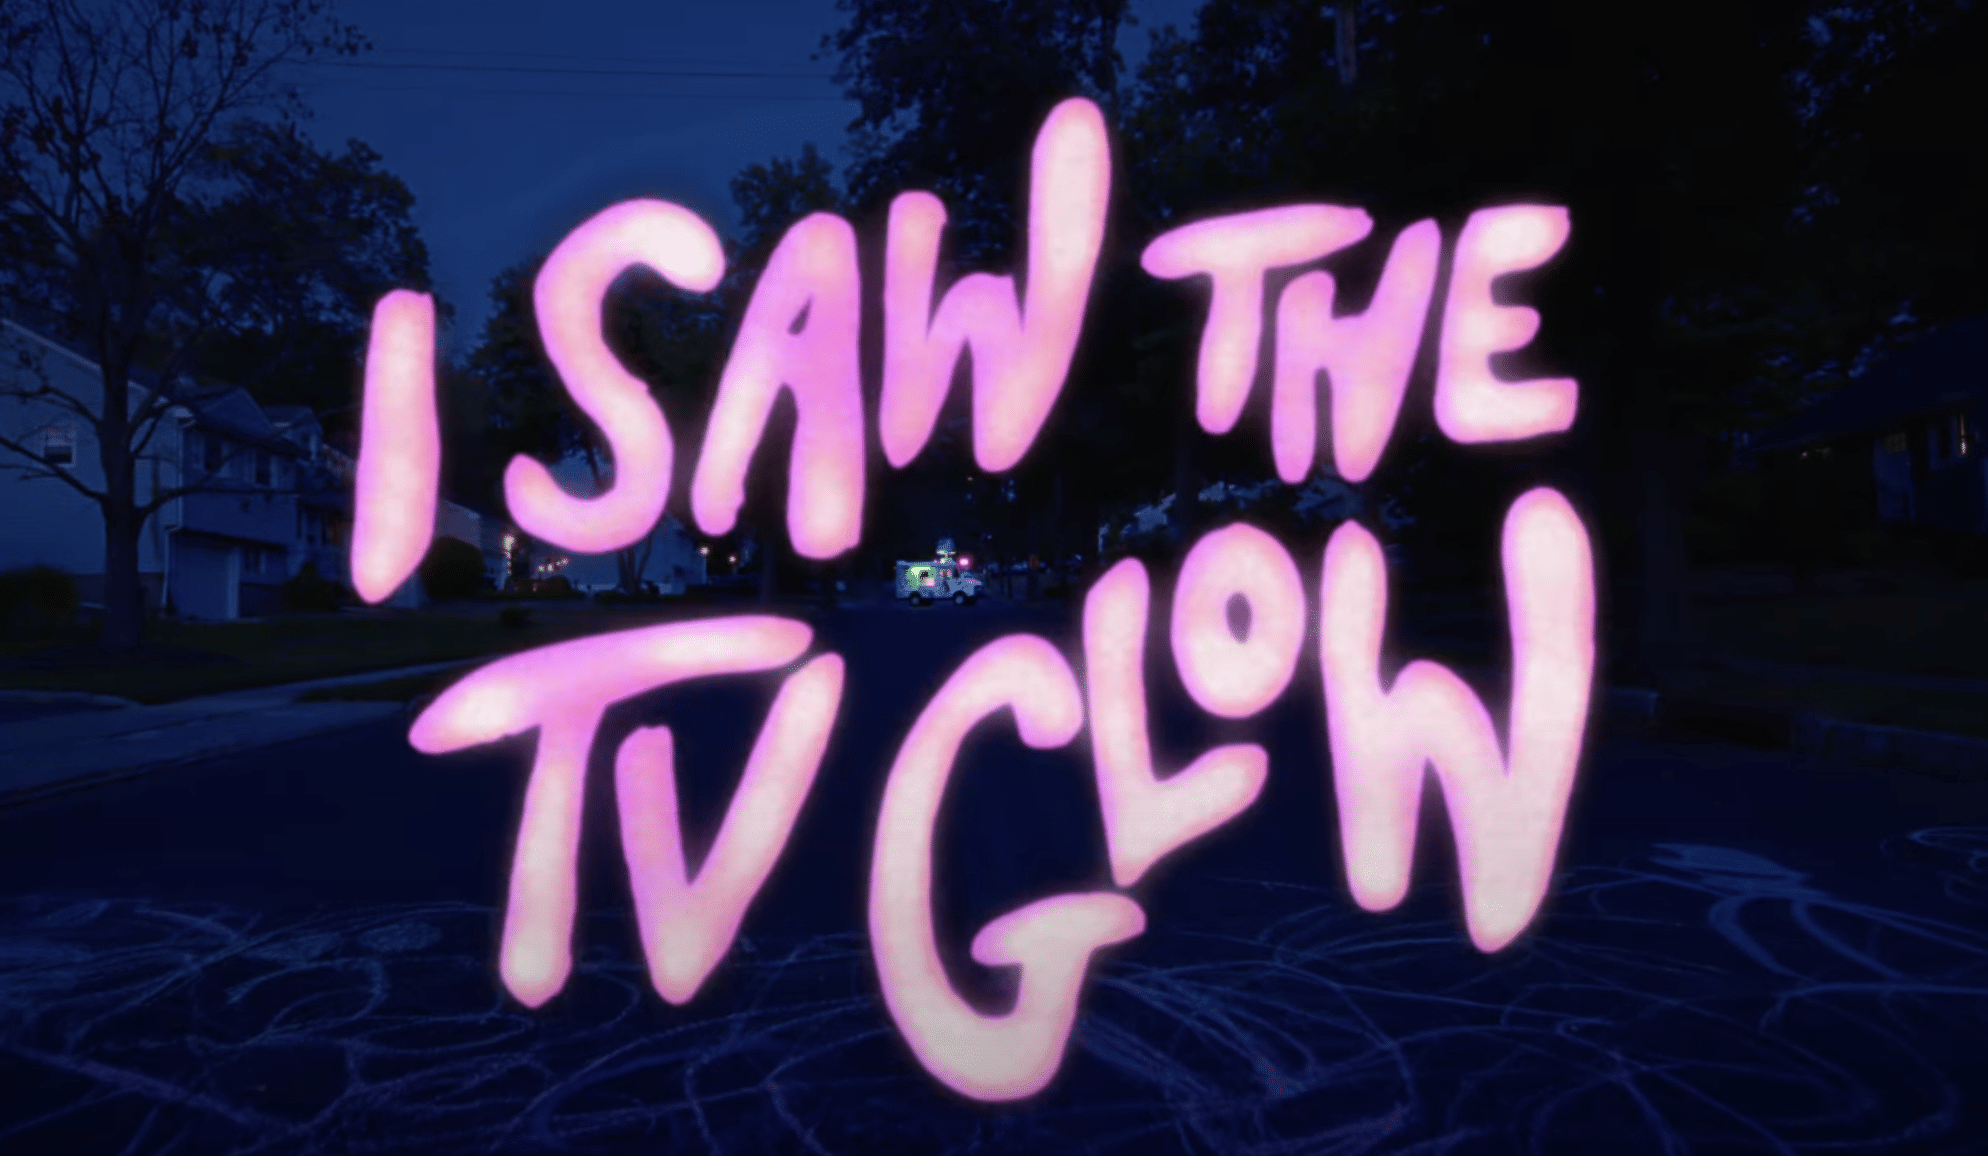 A24 debuts the trailer for festival fave 'I Saw The TV Glow'